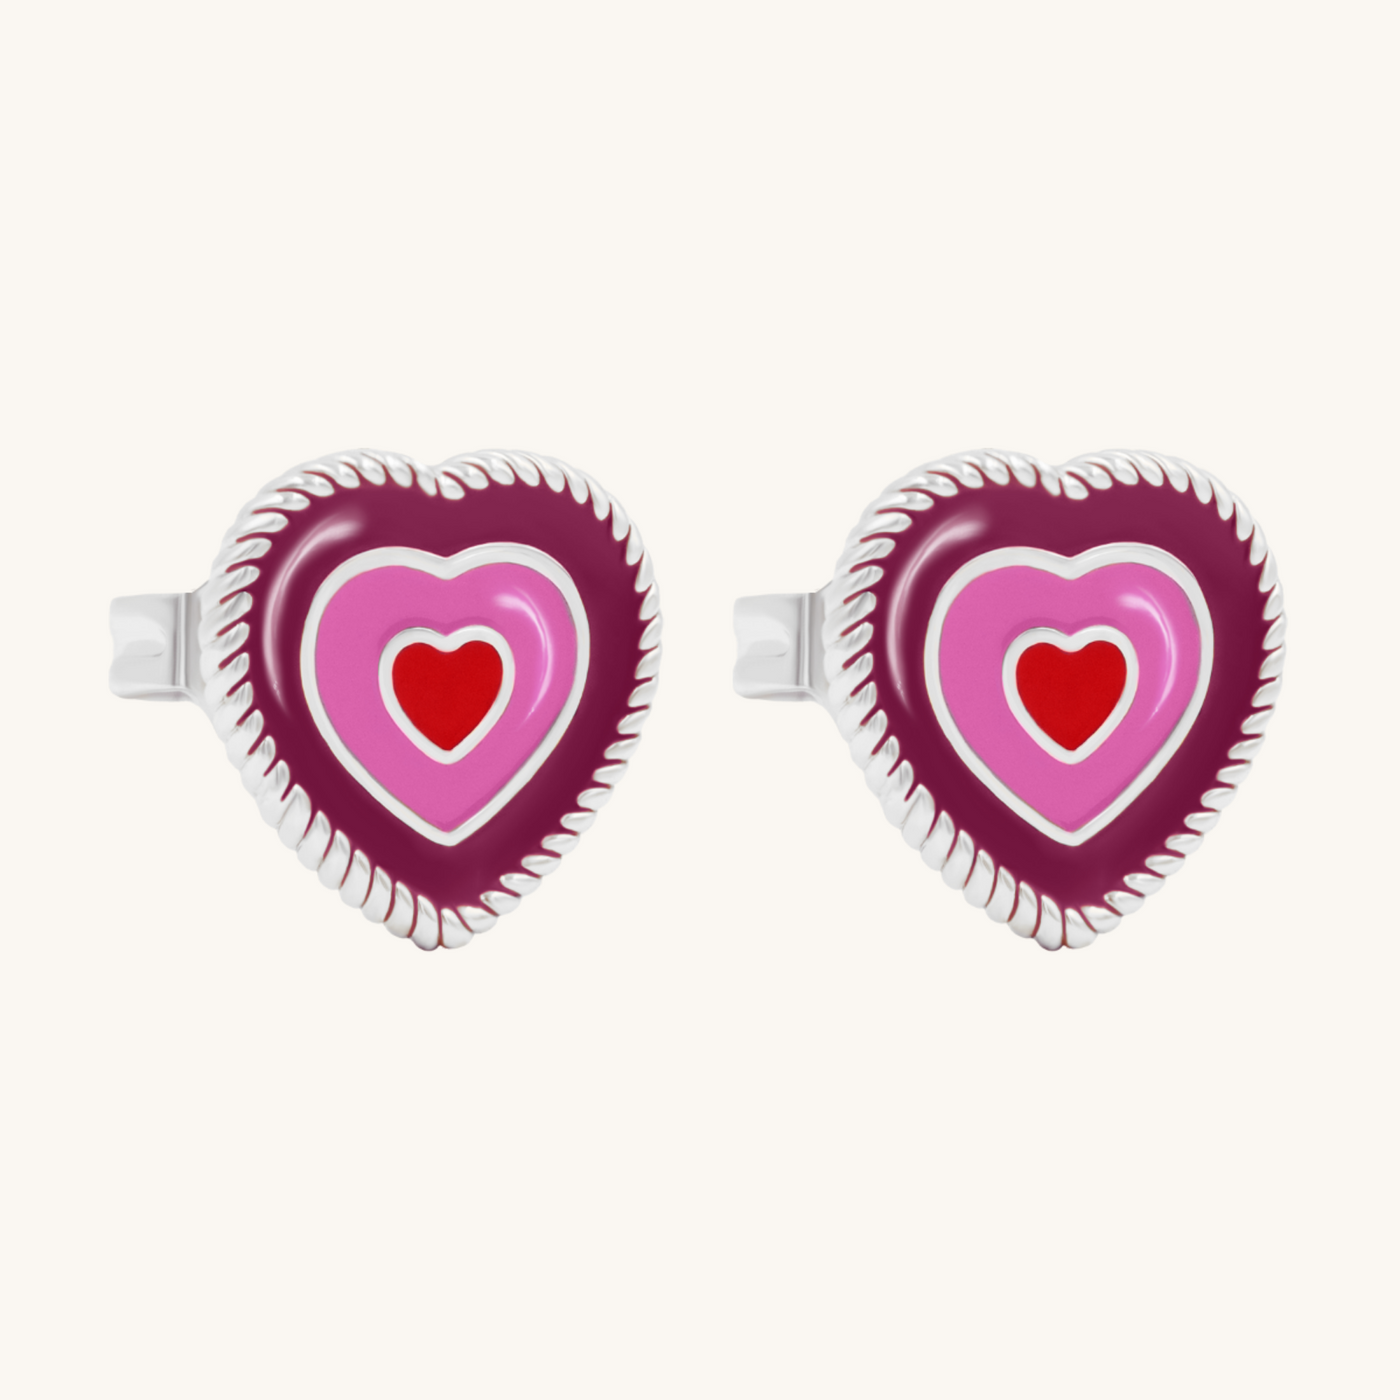 Heart Studs with Violet and Pink Enamel - Lilou Paris US